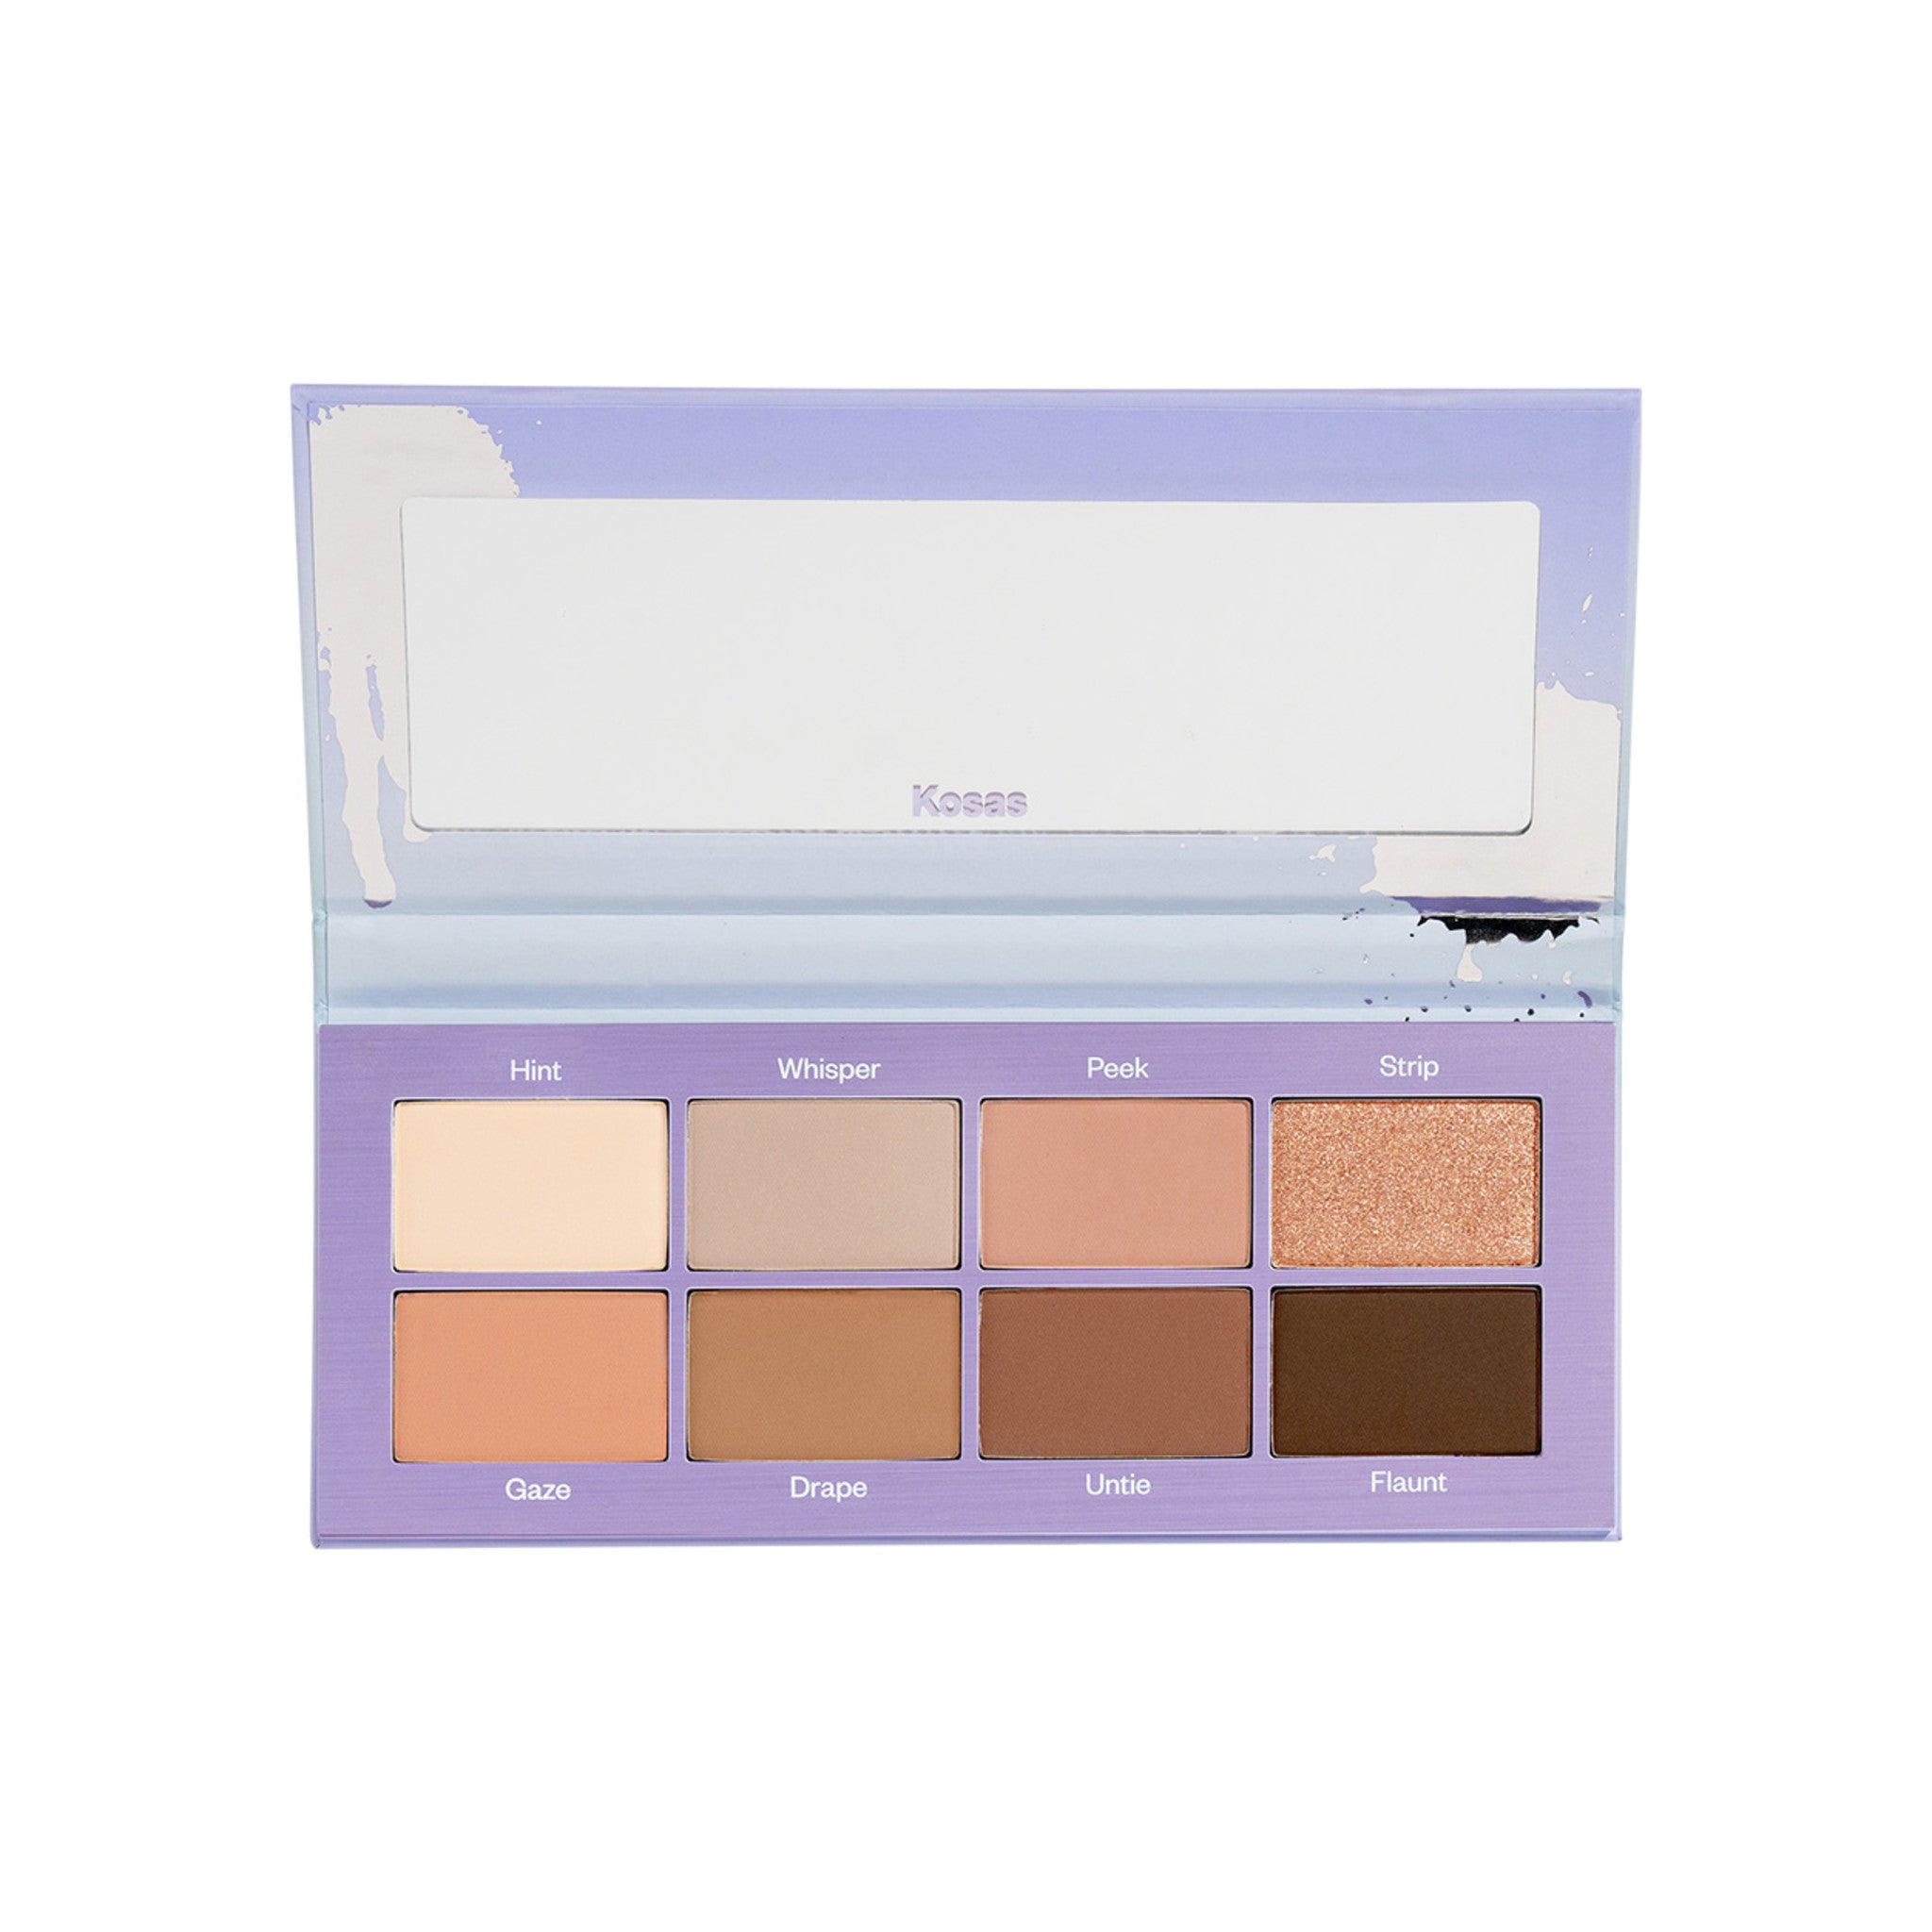 Kosas Undressed Eyeshadow Palette (Limited Edition) main image. This product is in the color nude